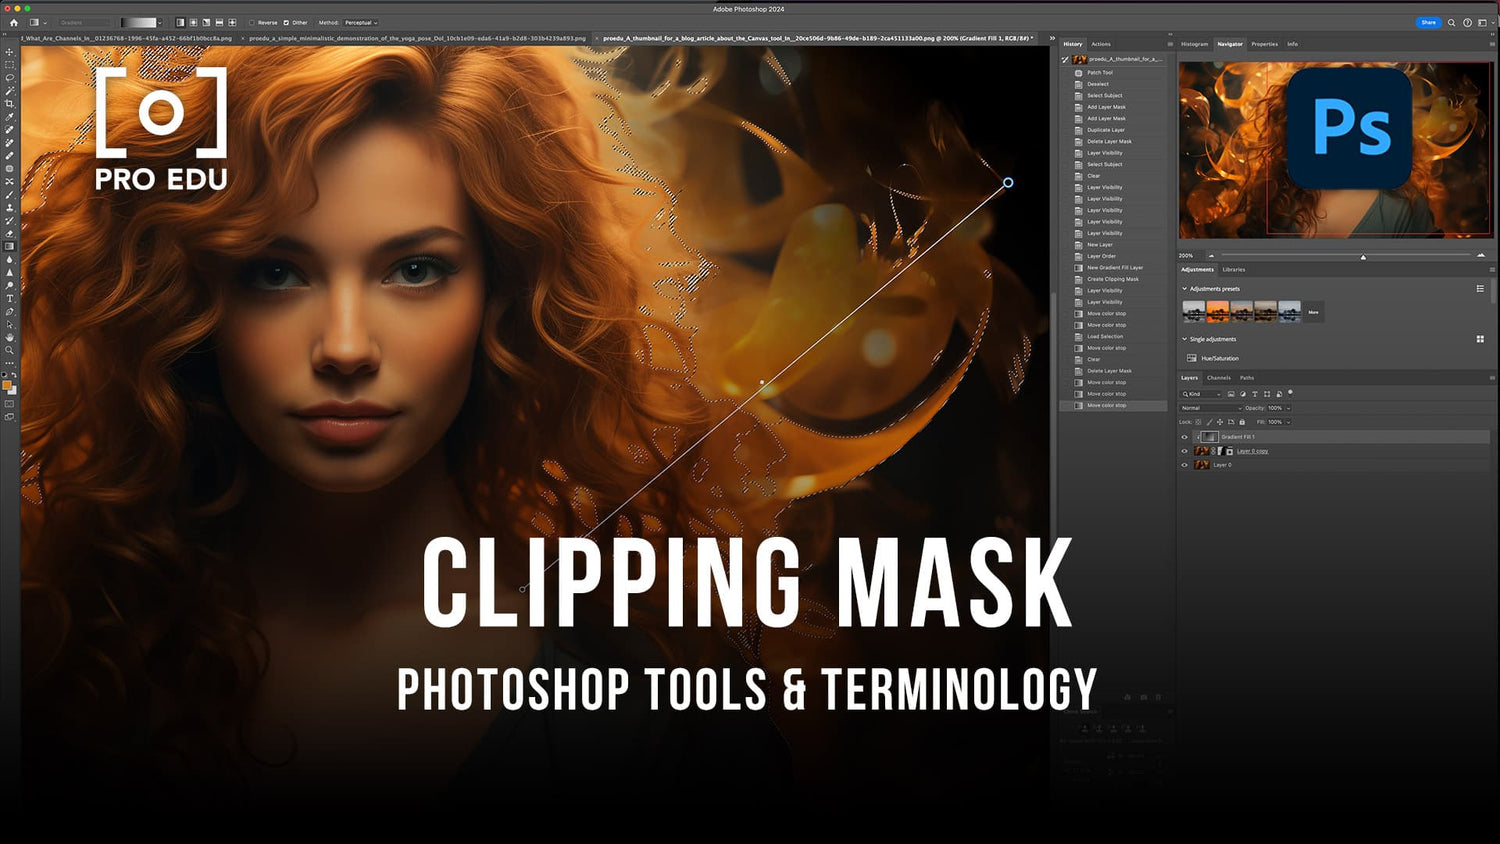 Clipping Mask in Photoshop - PRO EDU Guide